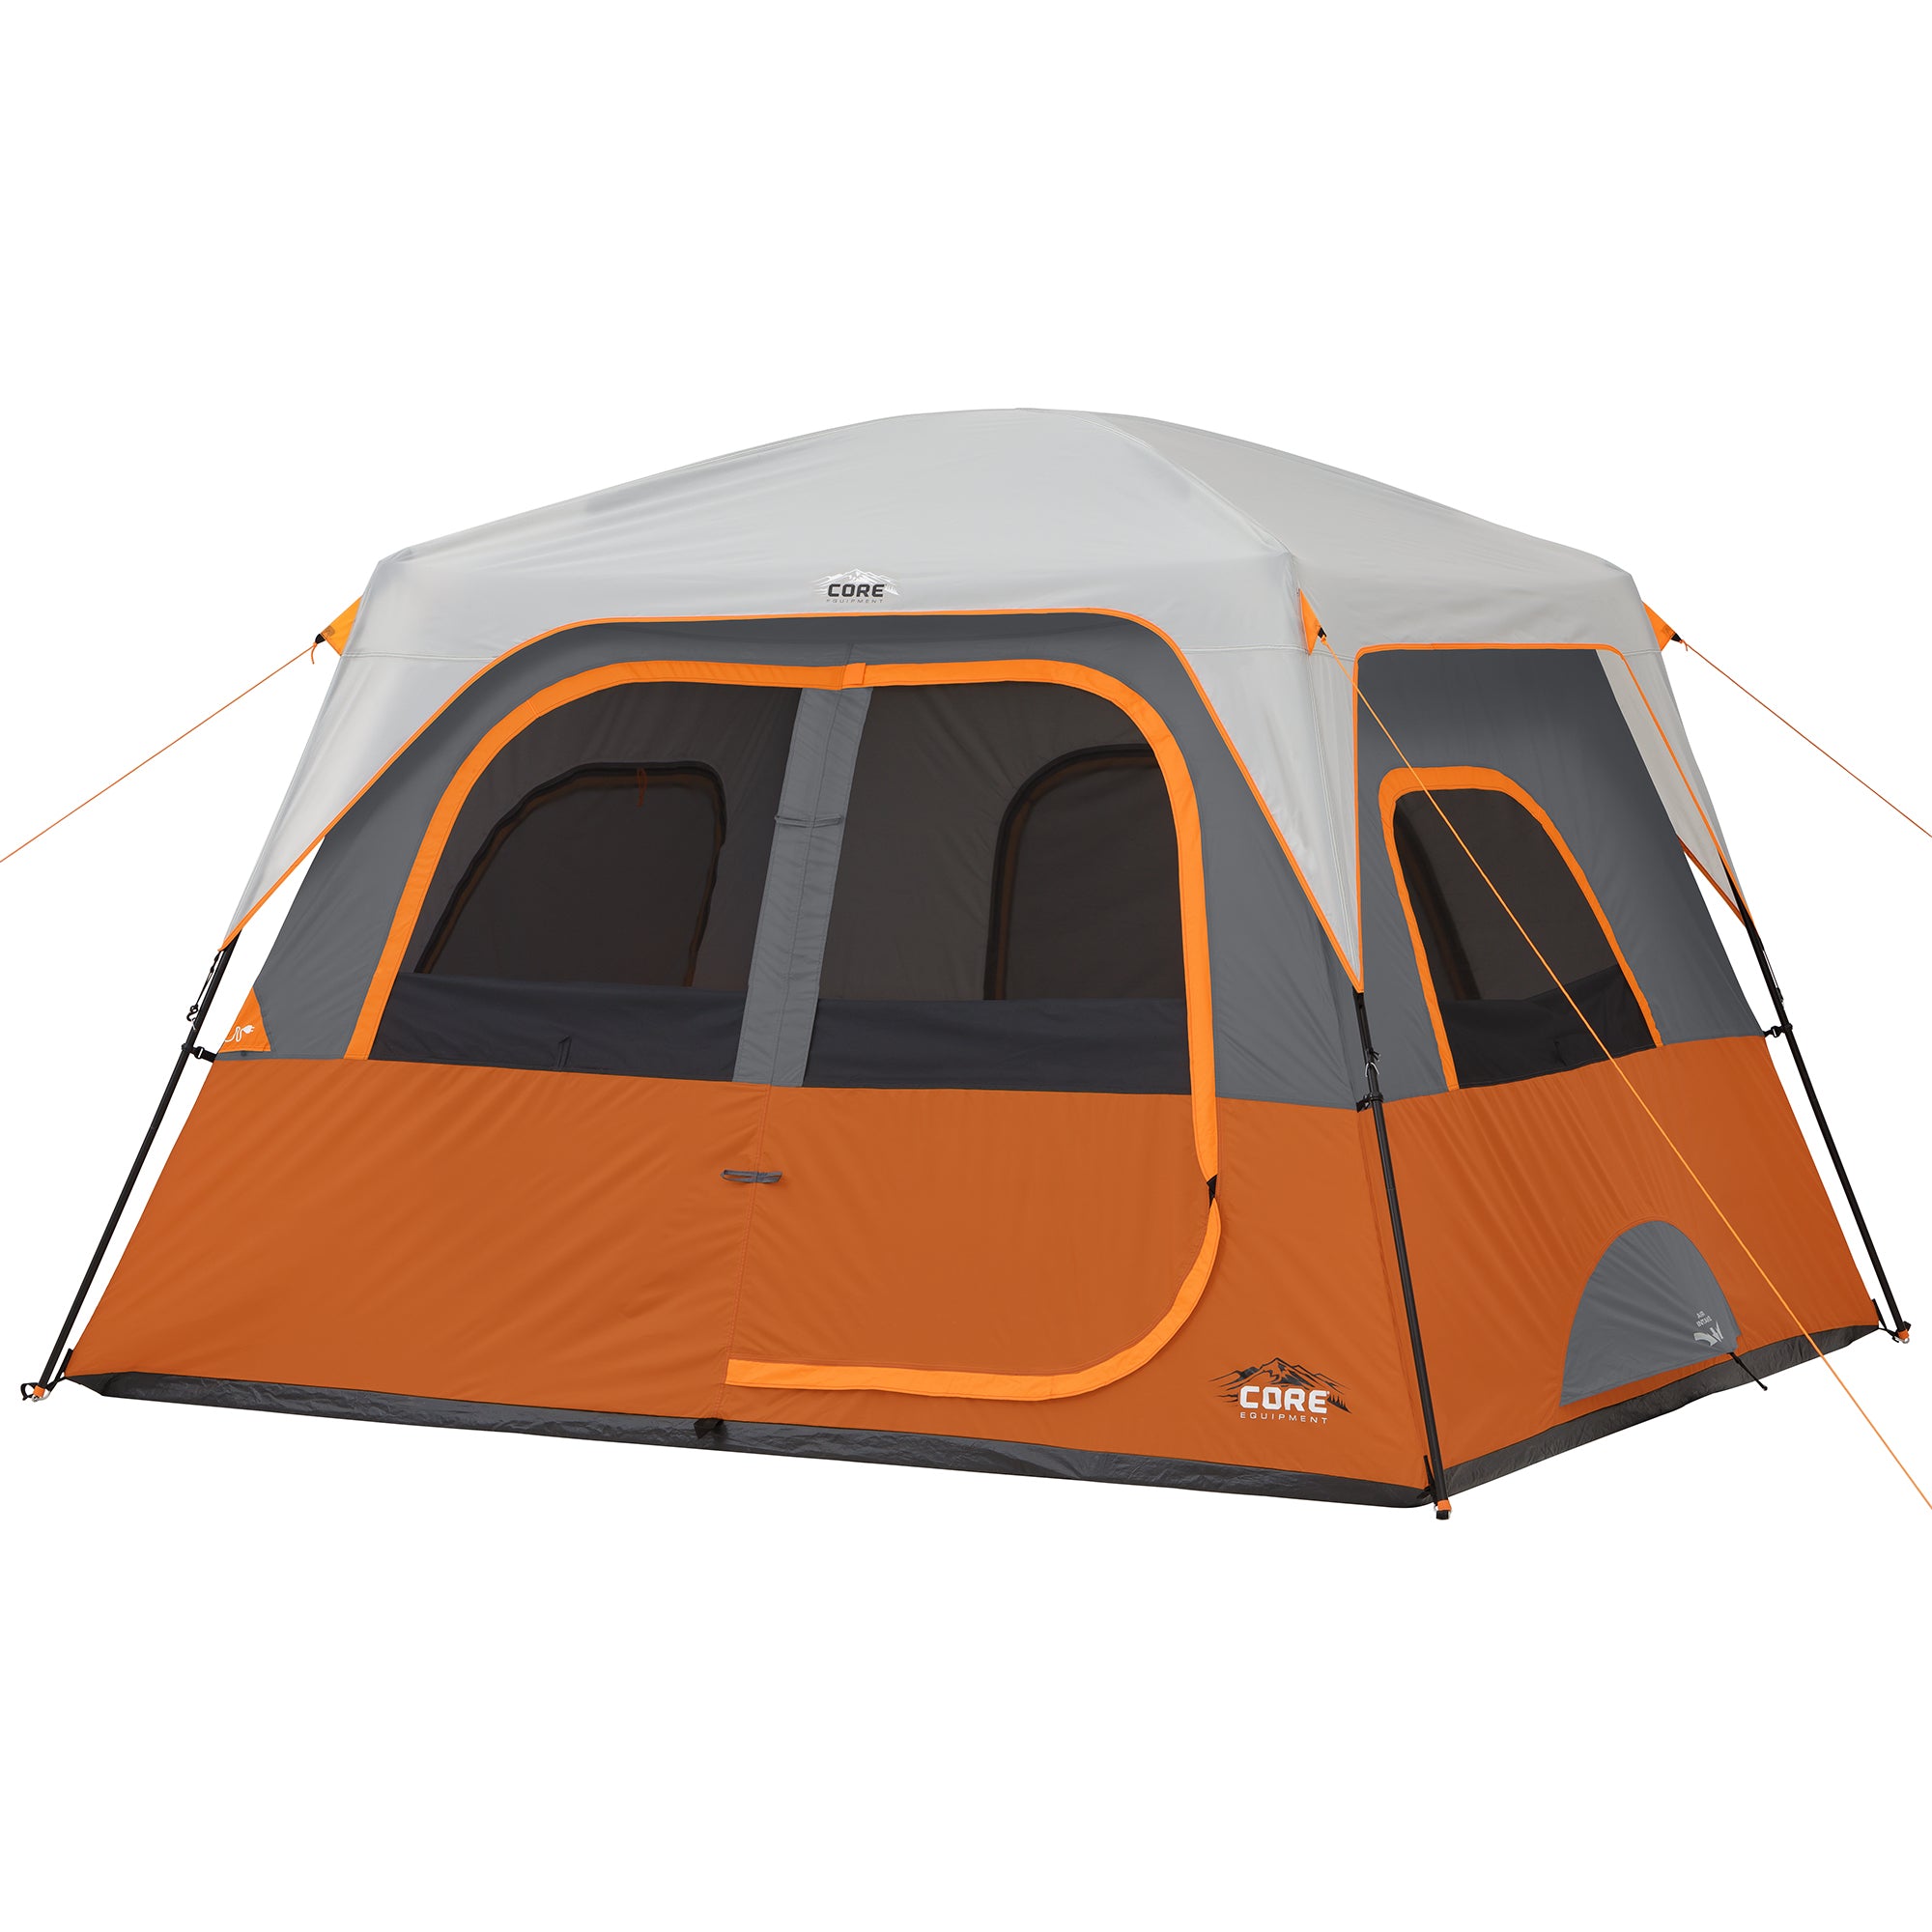  Outdoor Products Camping Tent - Instant Cabin Tent Easy Pop Up, 6 Person Tent